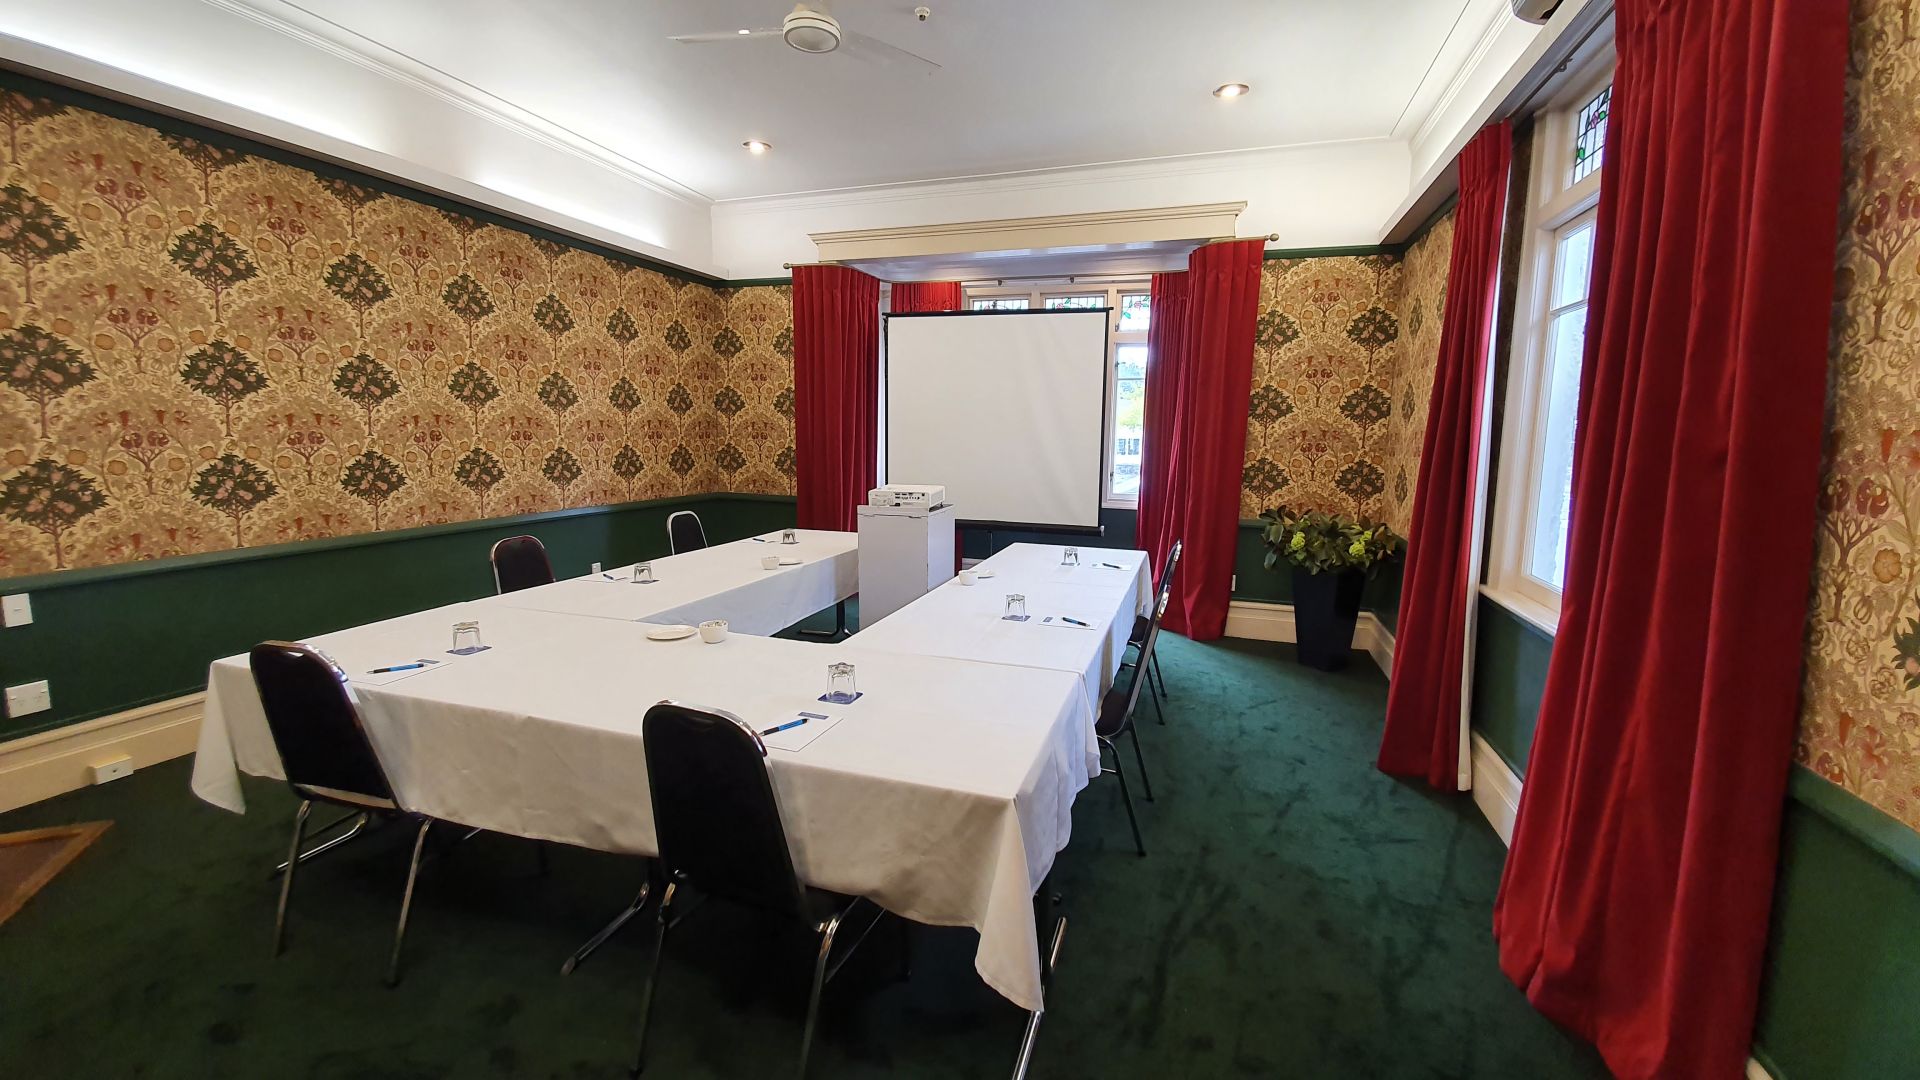 The Disraeli Private Dining And Meeting Room At The Parnell Hotel & Conference Centre